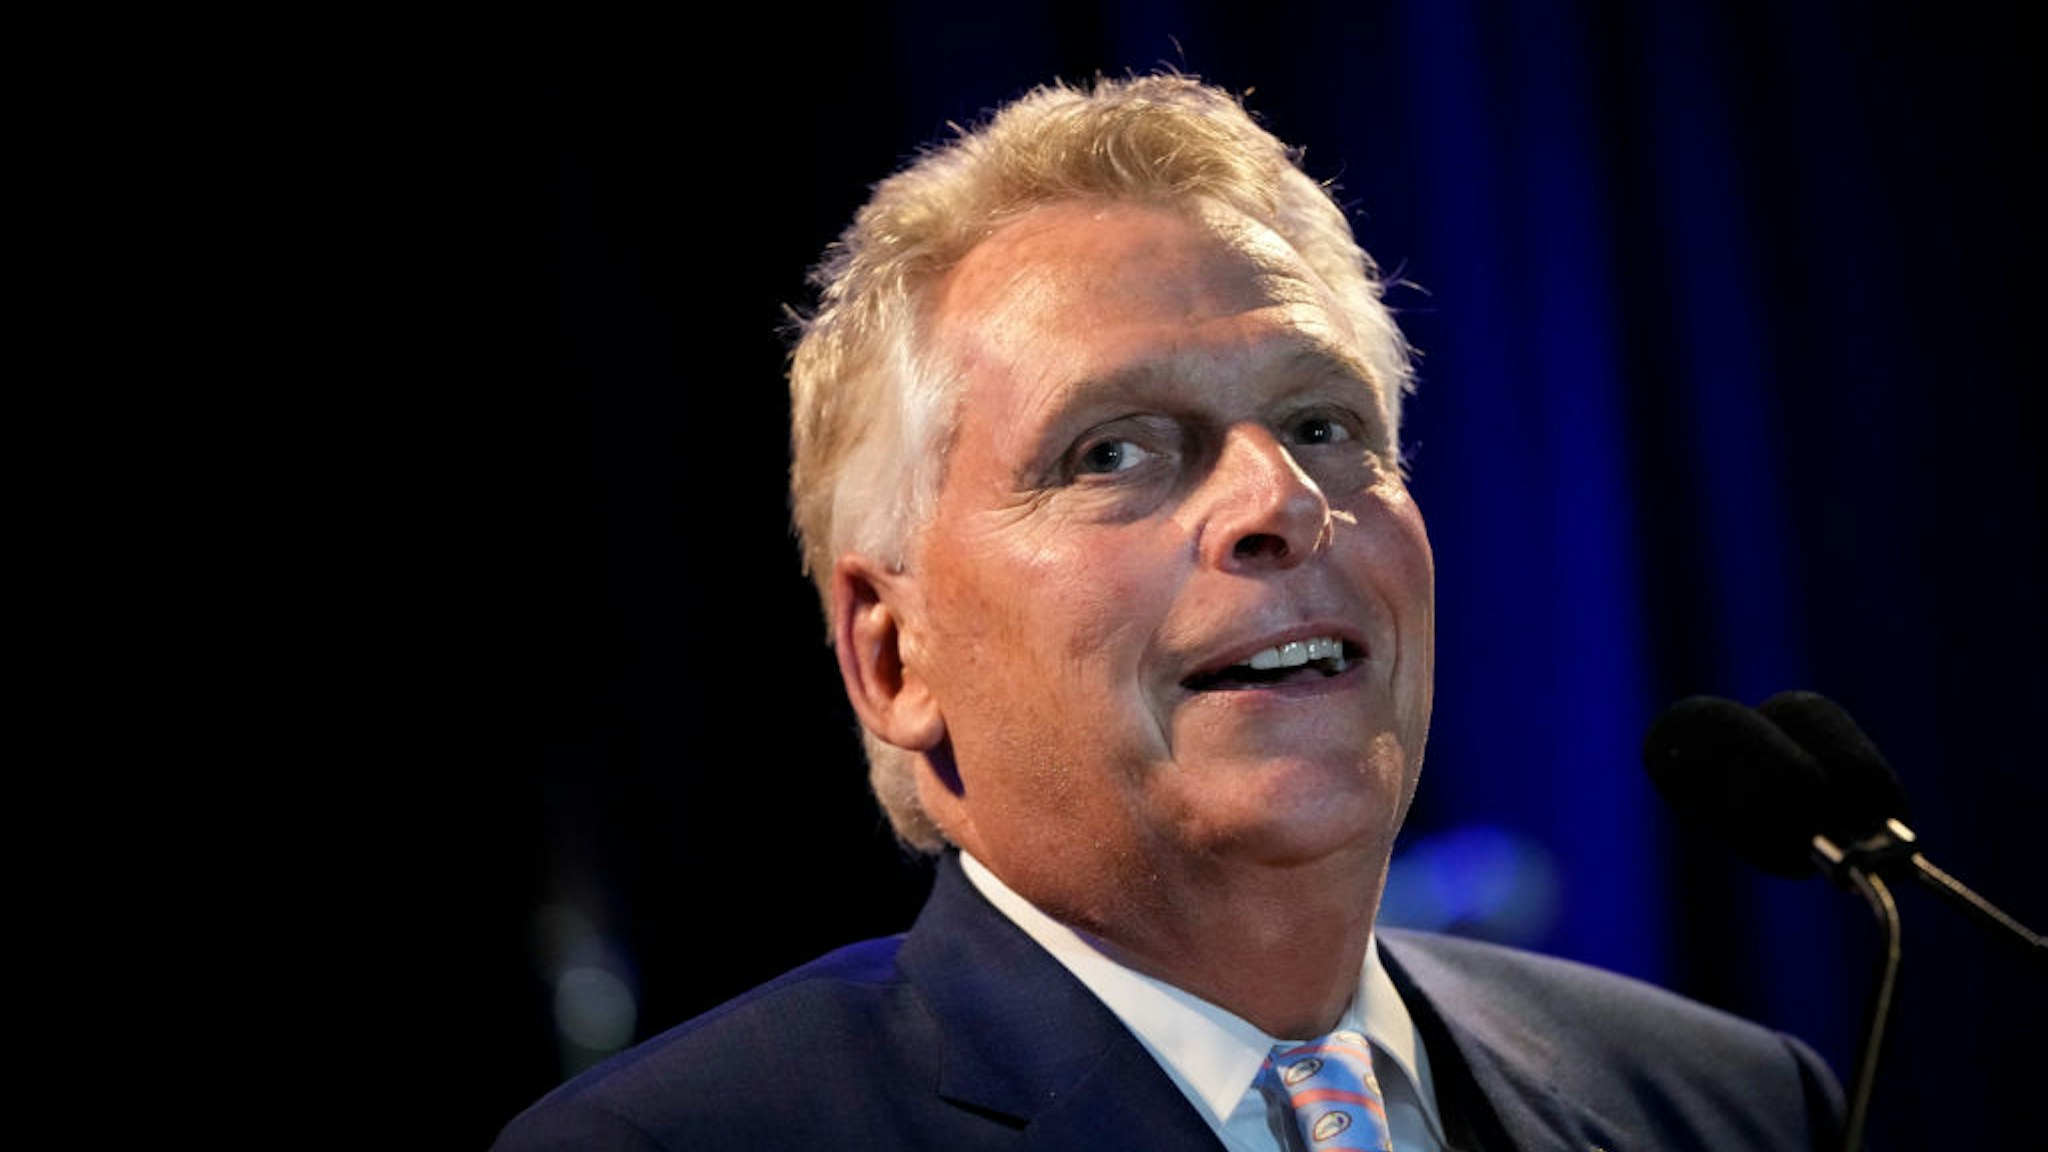 Gubernatorial candidate Terry McAuliffe greets supporters at an election-night event after winning the Democratic primary on June 8, 2021 in McLean, Virginia.